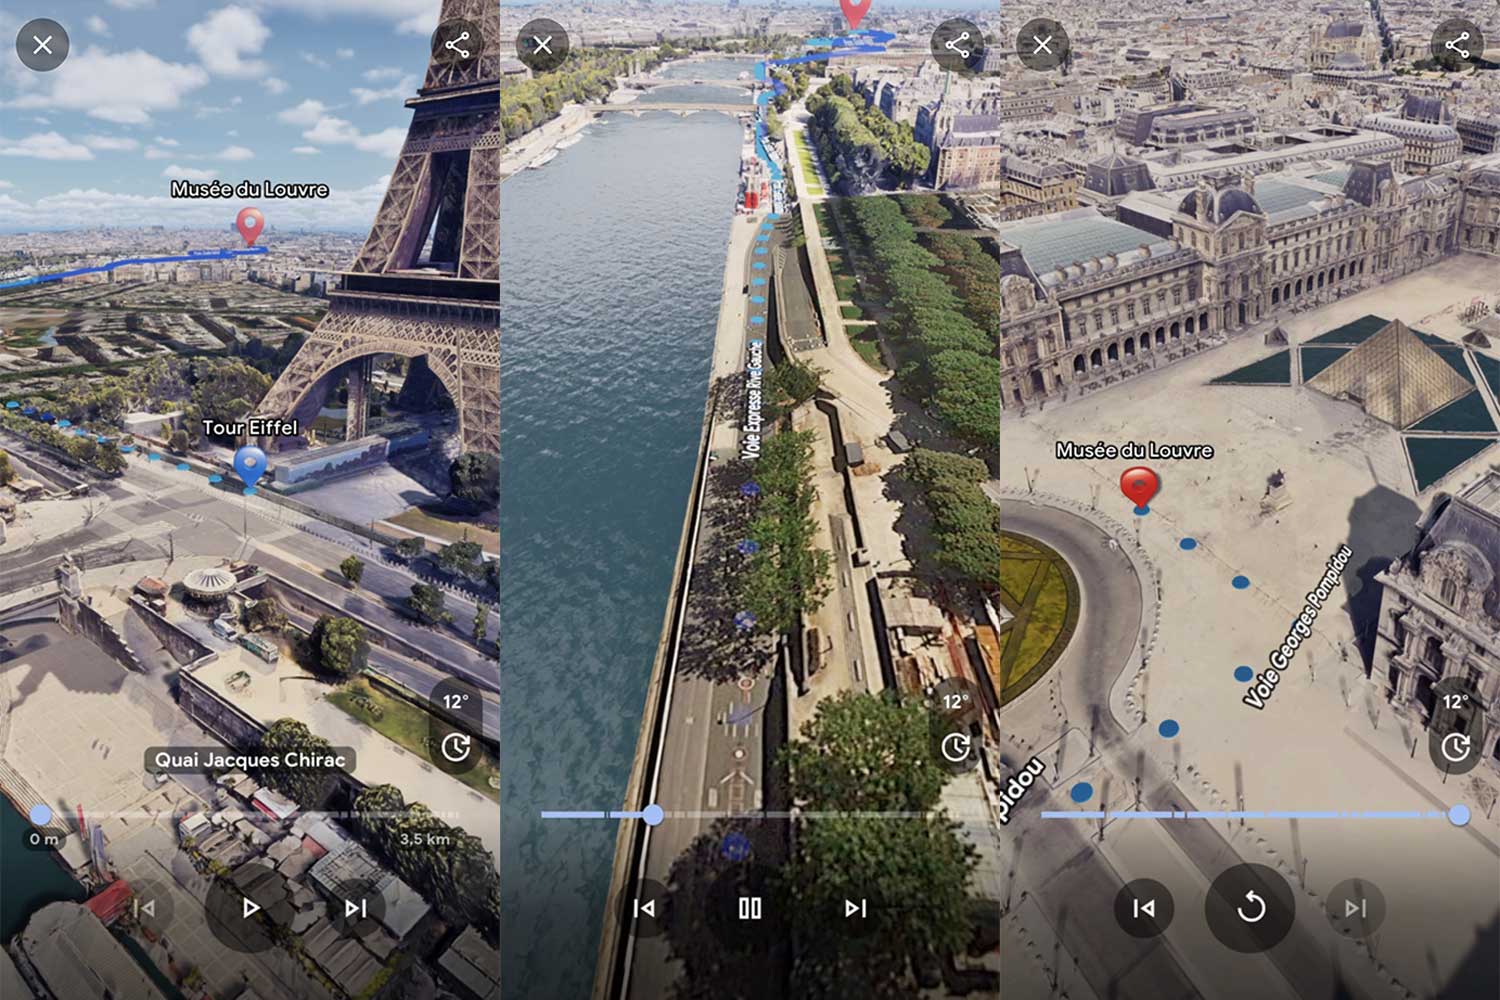 How to use the new 3D navigation?